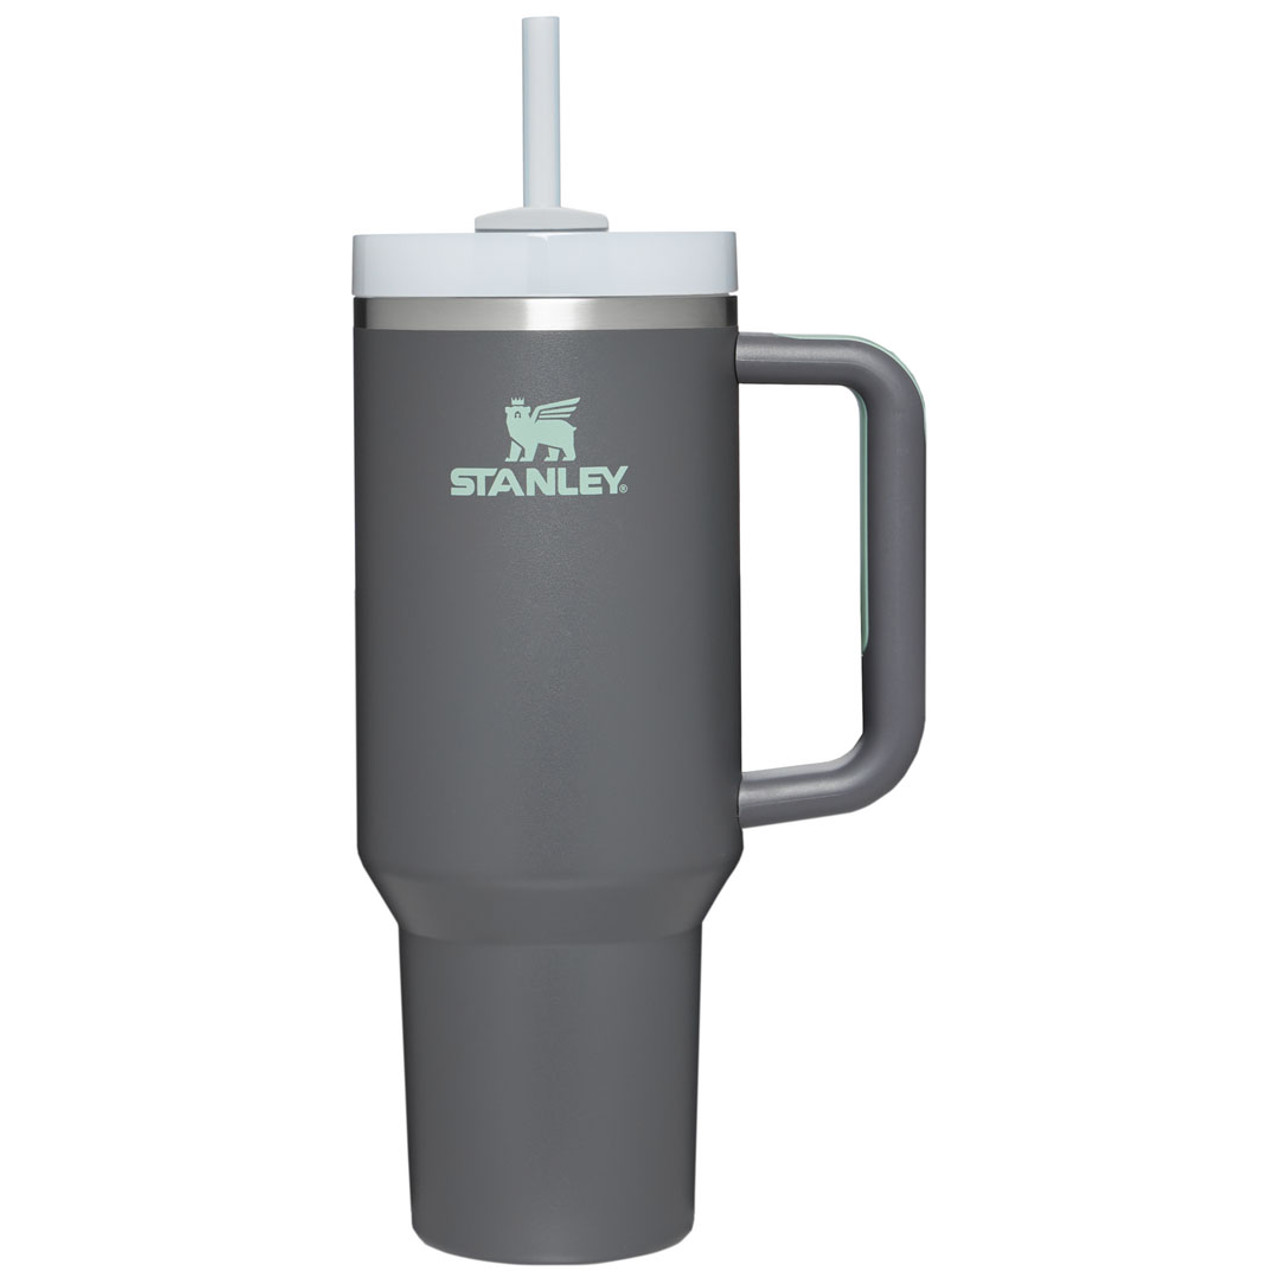 https://cdn11.bigcommerce.com/s-ppsyskcavg/images/stencil/1280x1280/products/68700/248253/B2B_Web_PNG-The-Quencher-H2-O-FlowState-Tumbler-Charcoal-Front_1d93c9c6-84d2-4ef4-82bd-213ee80f6623__06853.1700148081.jpg?c=2?imbypass=on